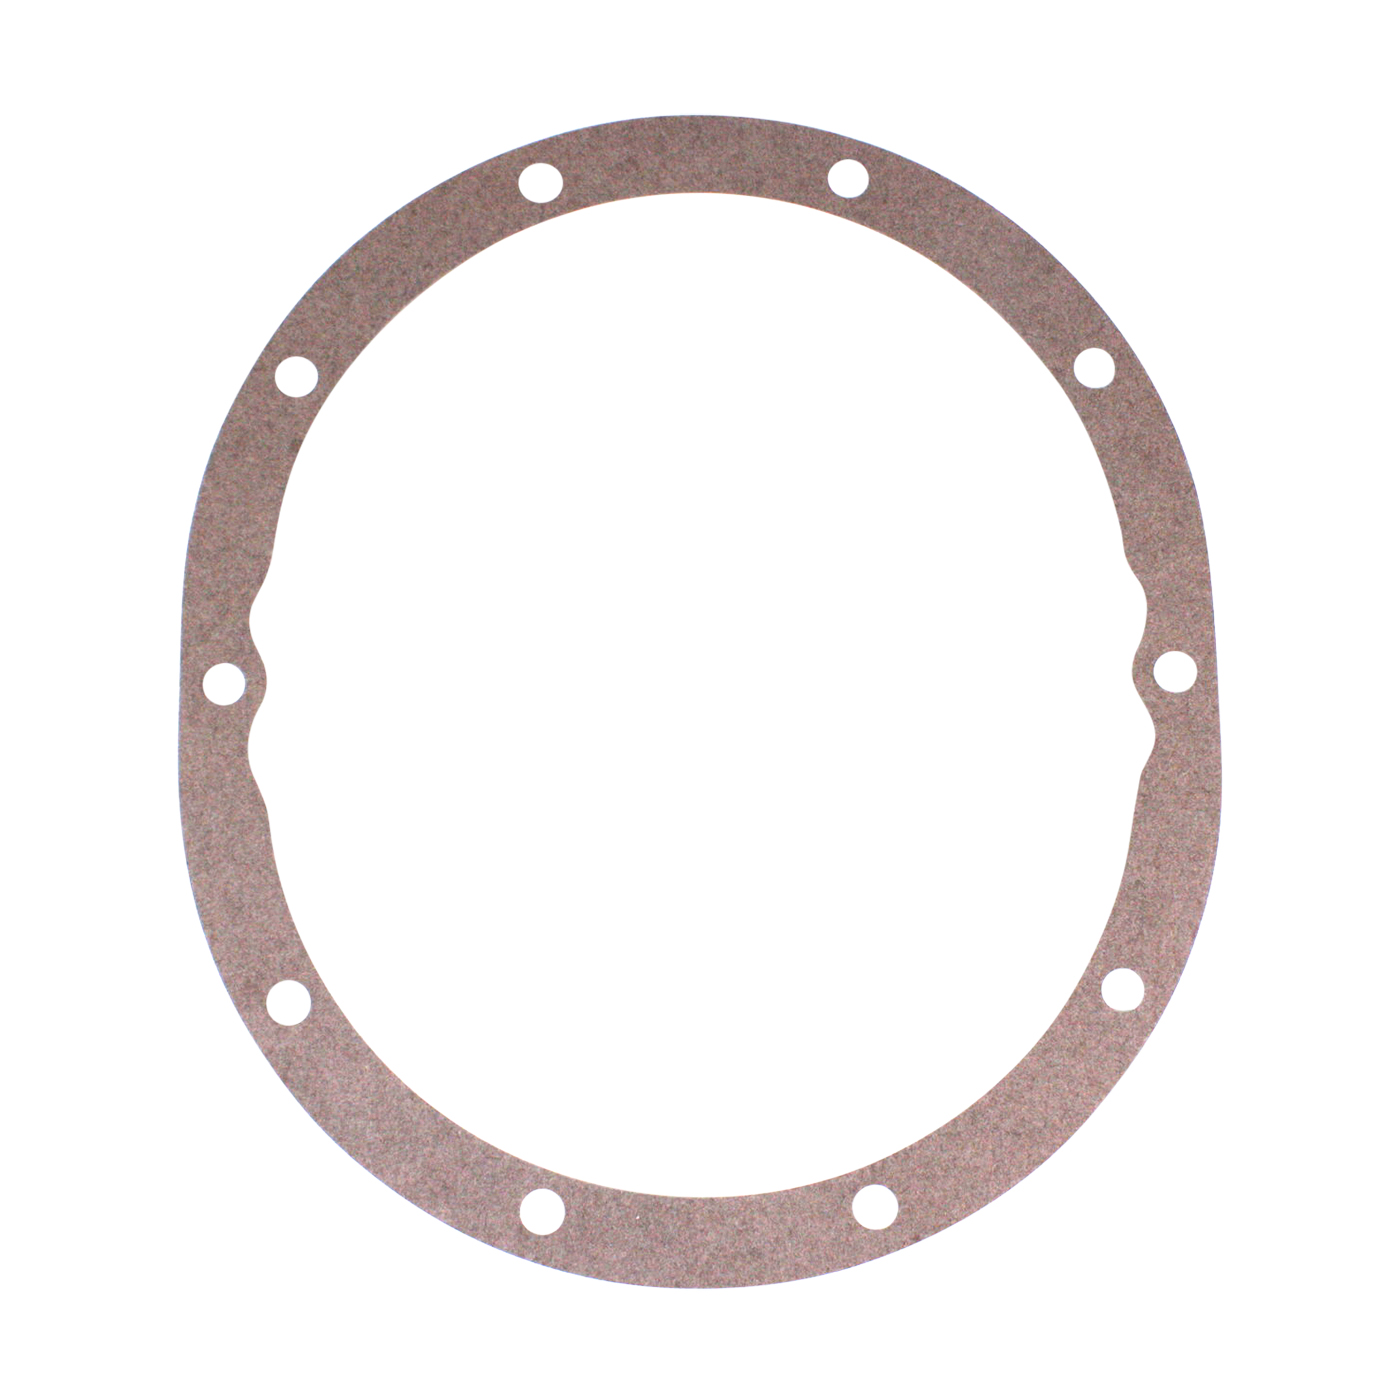 Chevy '55-'64 car and truck dropout gasket 